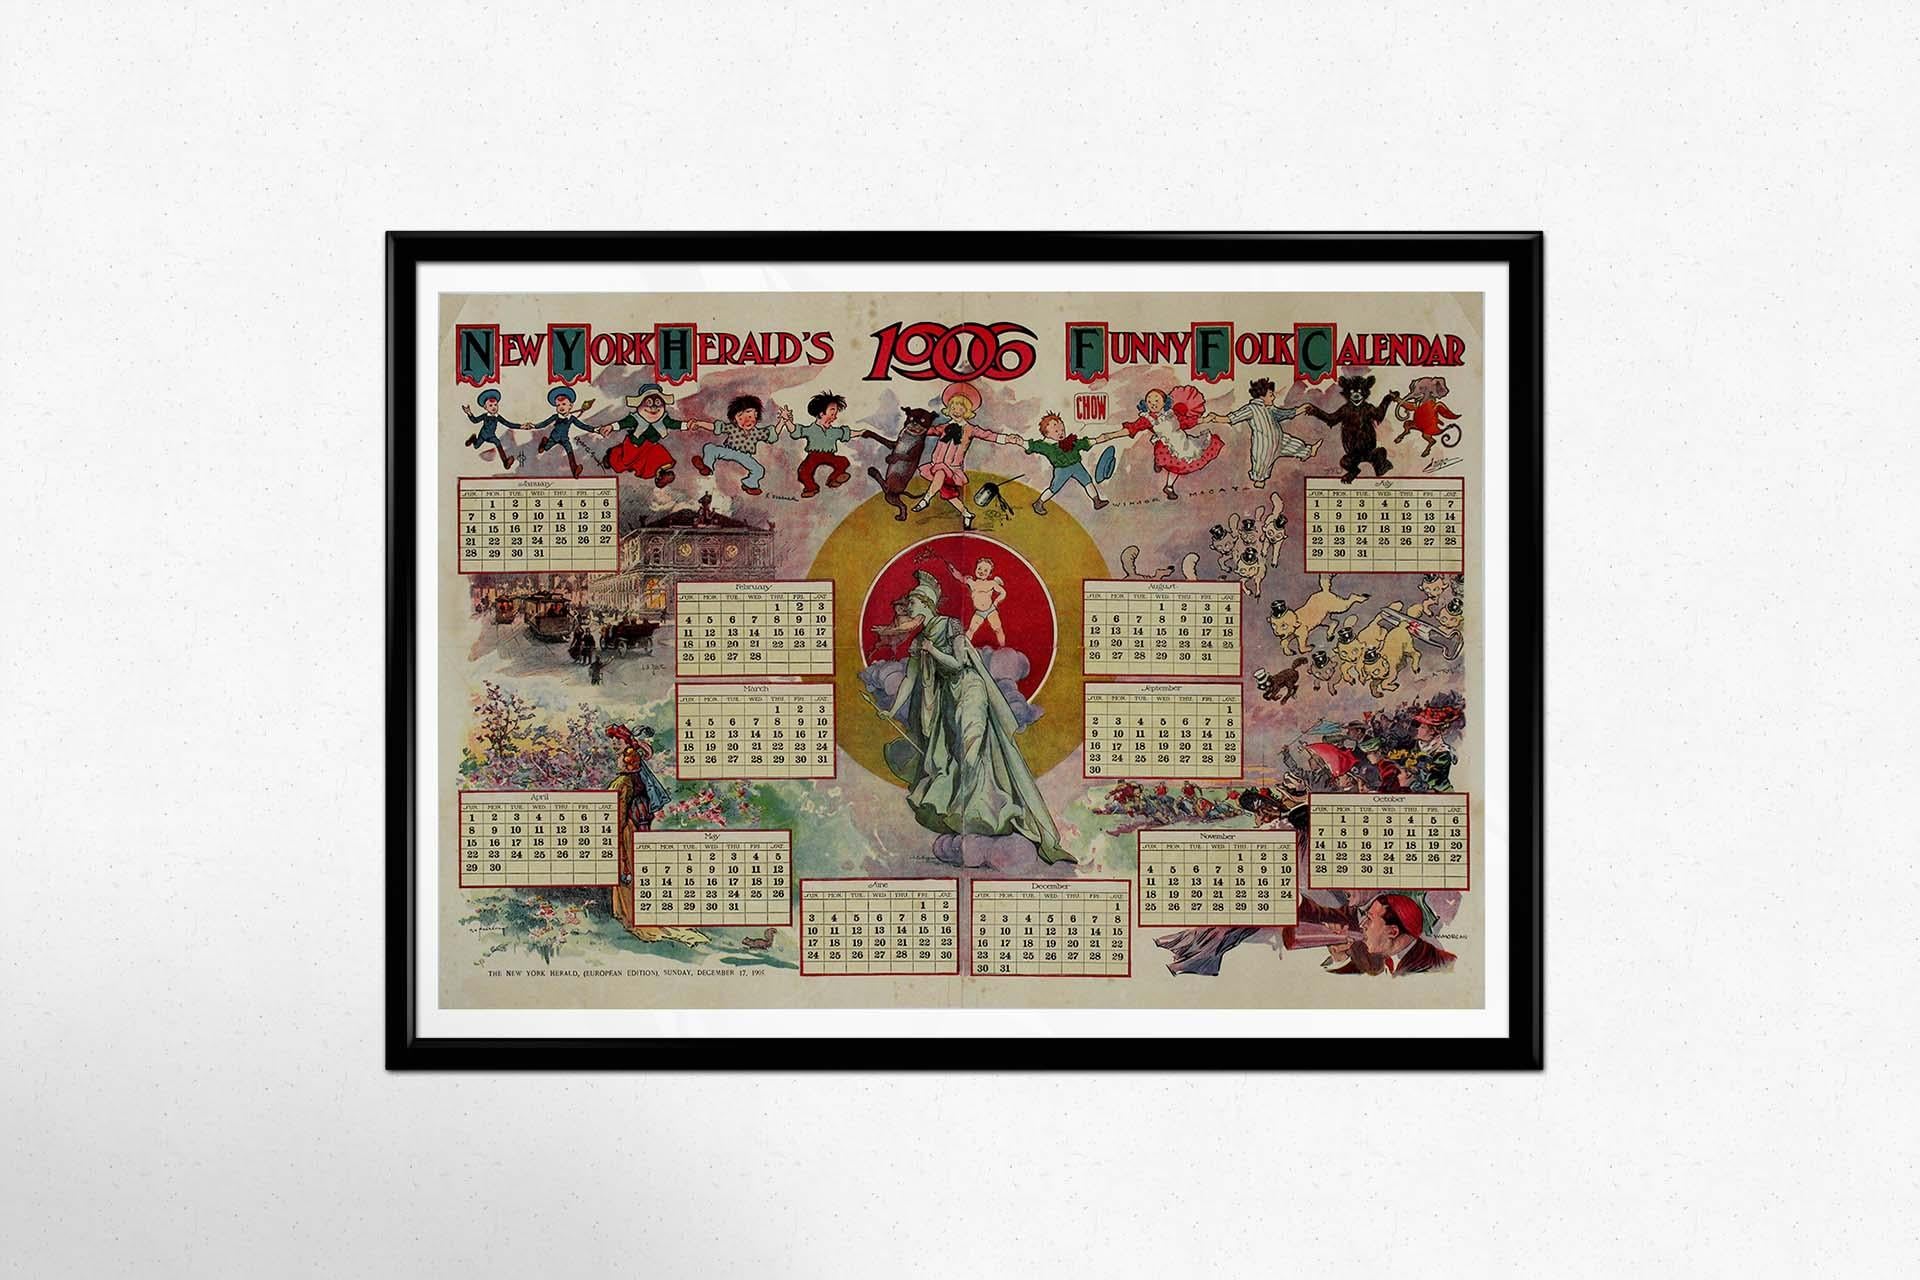 The New York Herald's 1906 Funny Folk Calendar is a delightful time capsule that transports us to a year filled with humor, whimsy, and artistic charm. This iconic calendar offers a glimpse into the past, where humor and illustration blended